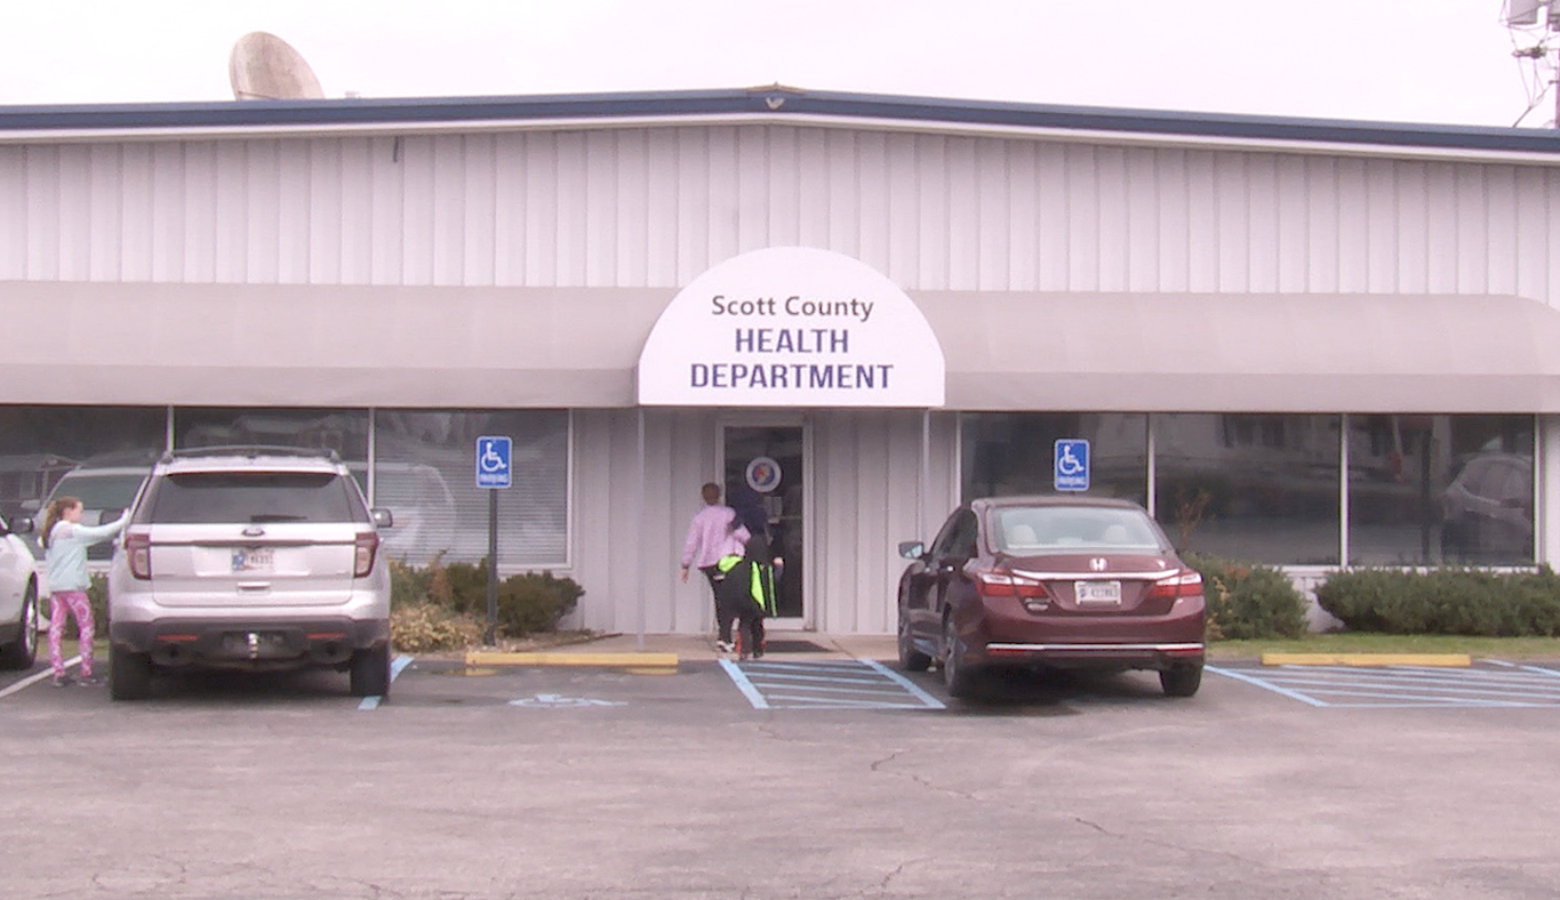 Scott County health officials say direct communication with communities has helped curb the spread of COVID-19. (FILE PHOTO: Seth Tackett/WTIU)